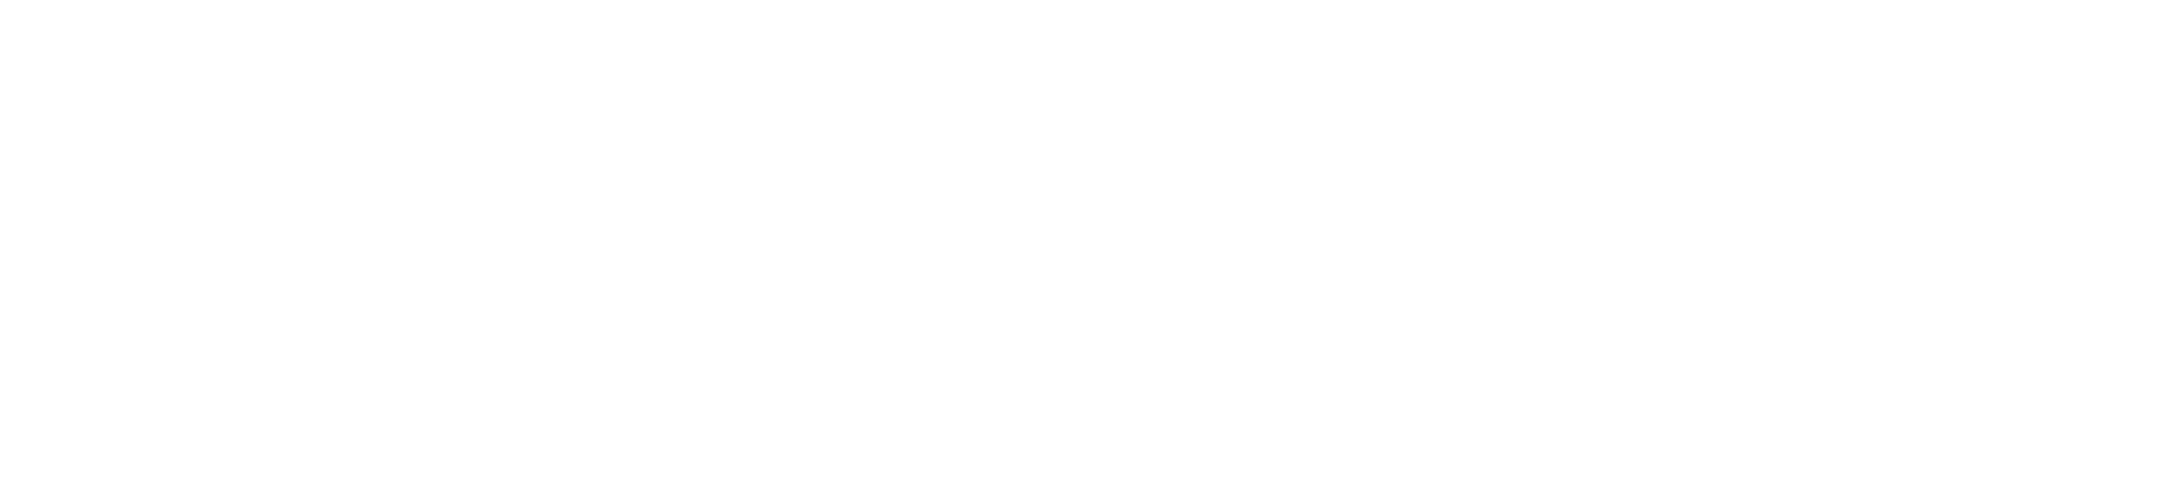 OFFICIAL-TIMS-Software-Service-Support-White-Open-Sans